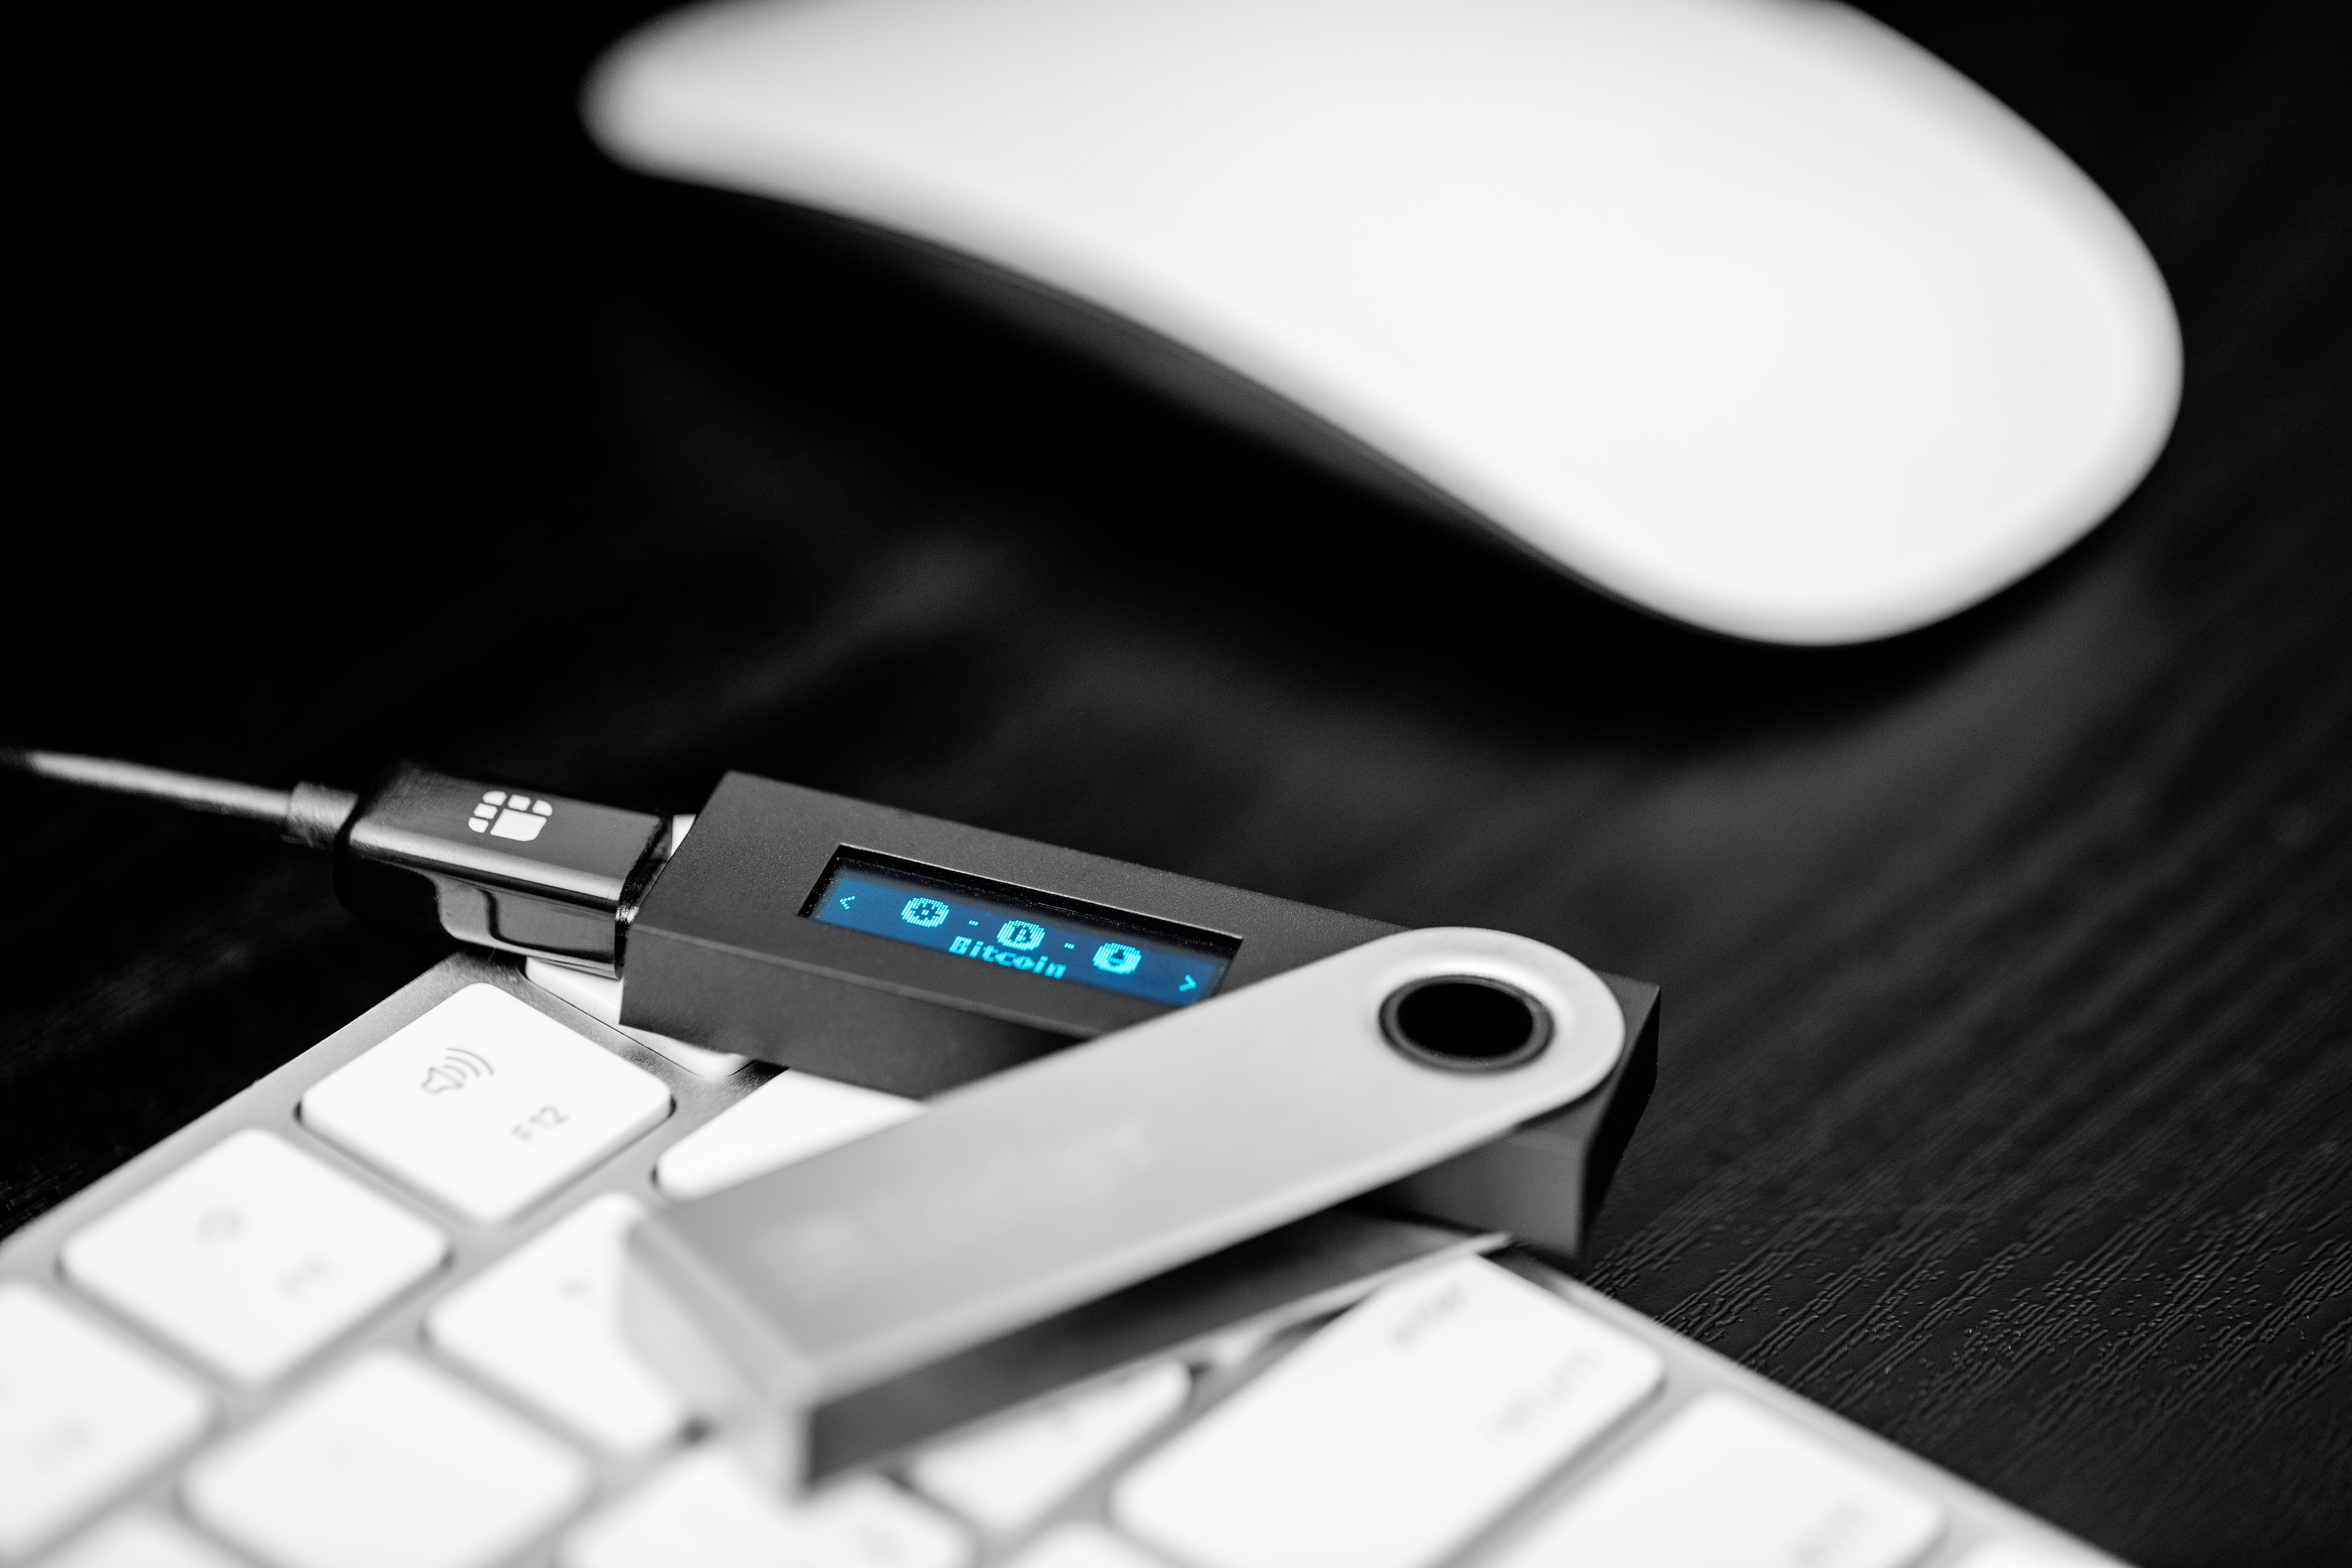 Crypto Wallet Ledger To Lay Off 10% of Workforce Following Product